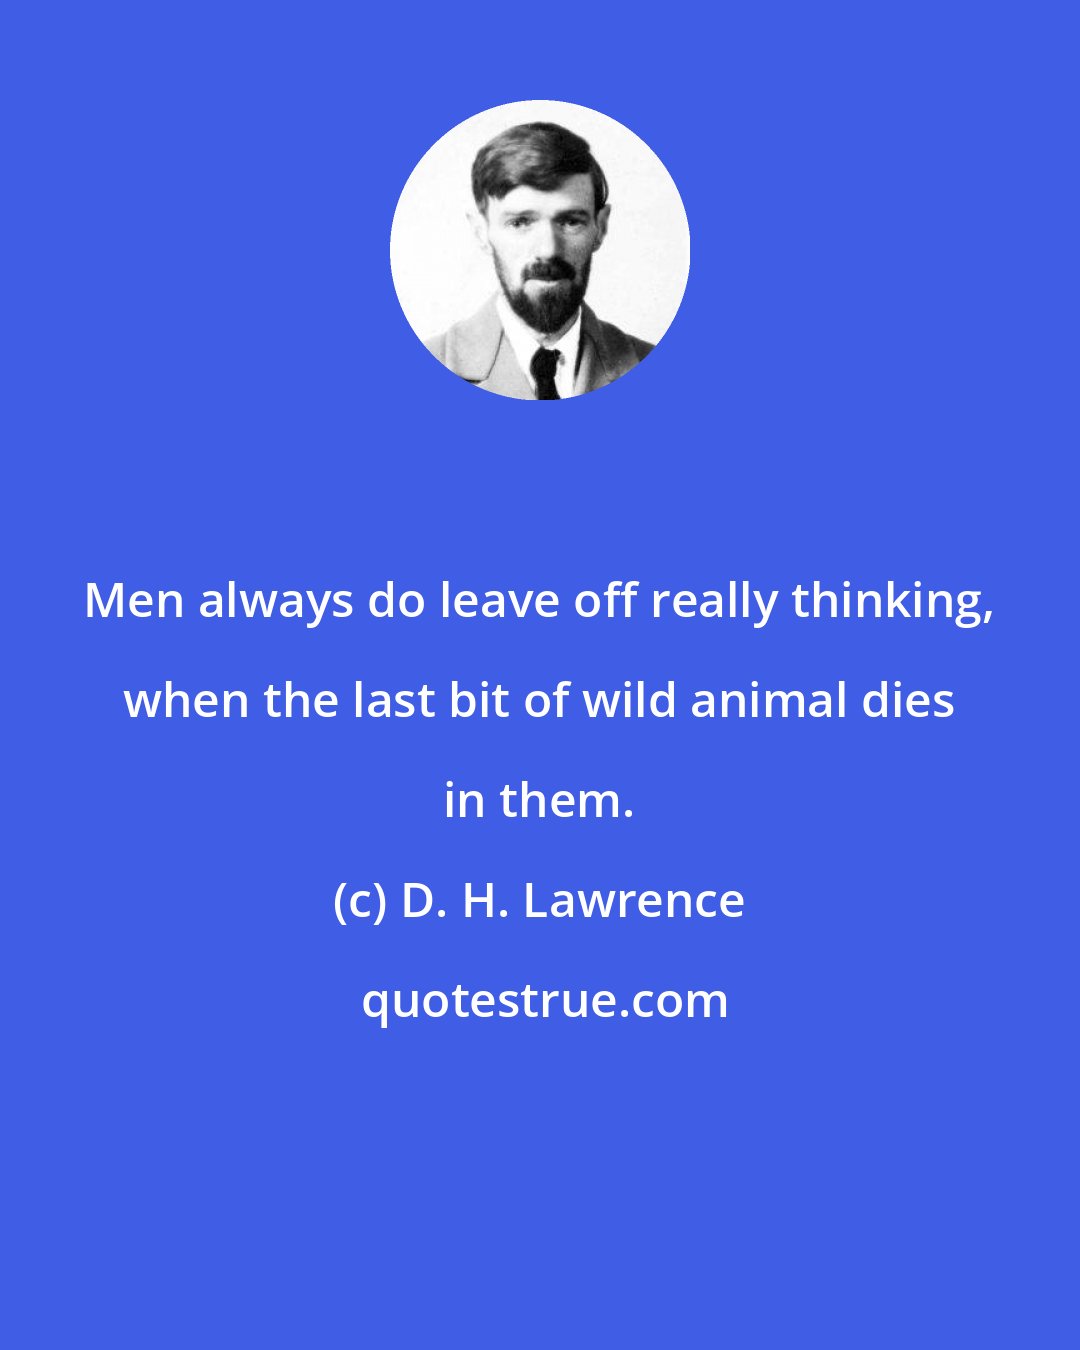 D. H. Lawrence: Men always do leave off really thinking, when the last bit of wild animal dies in them.